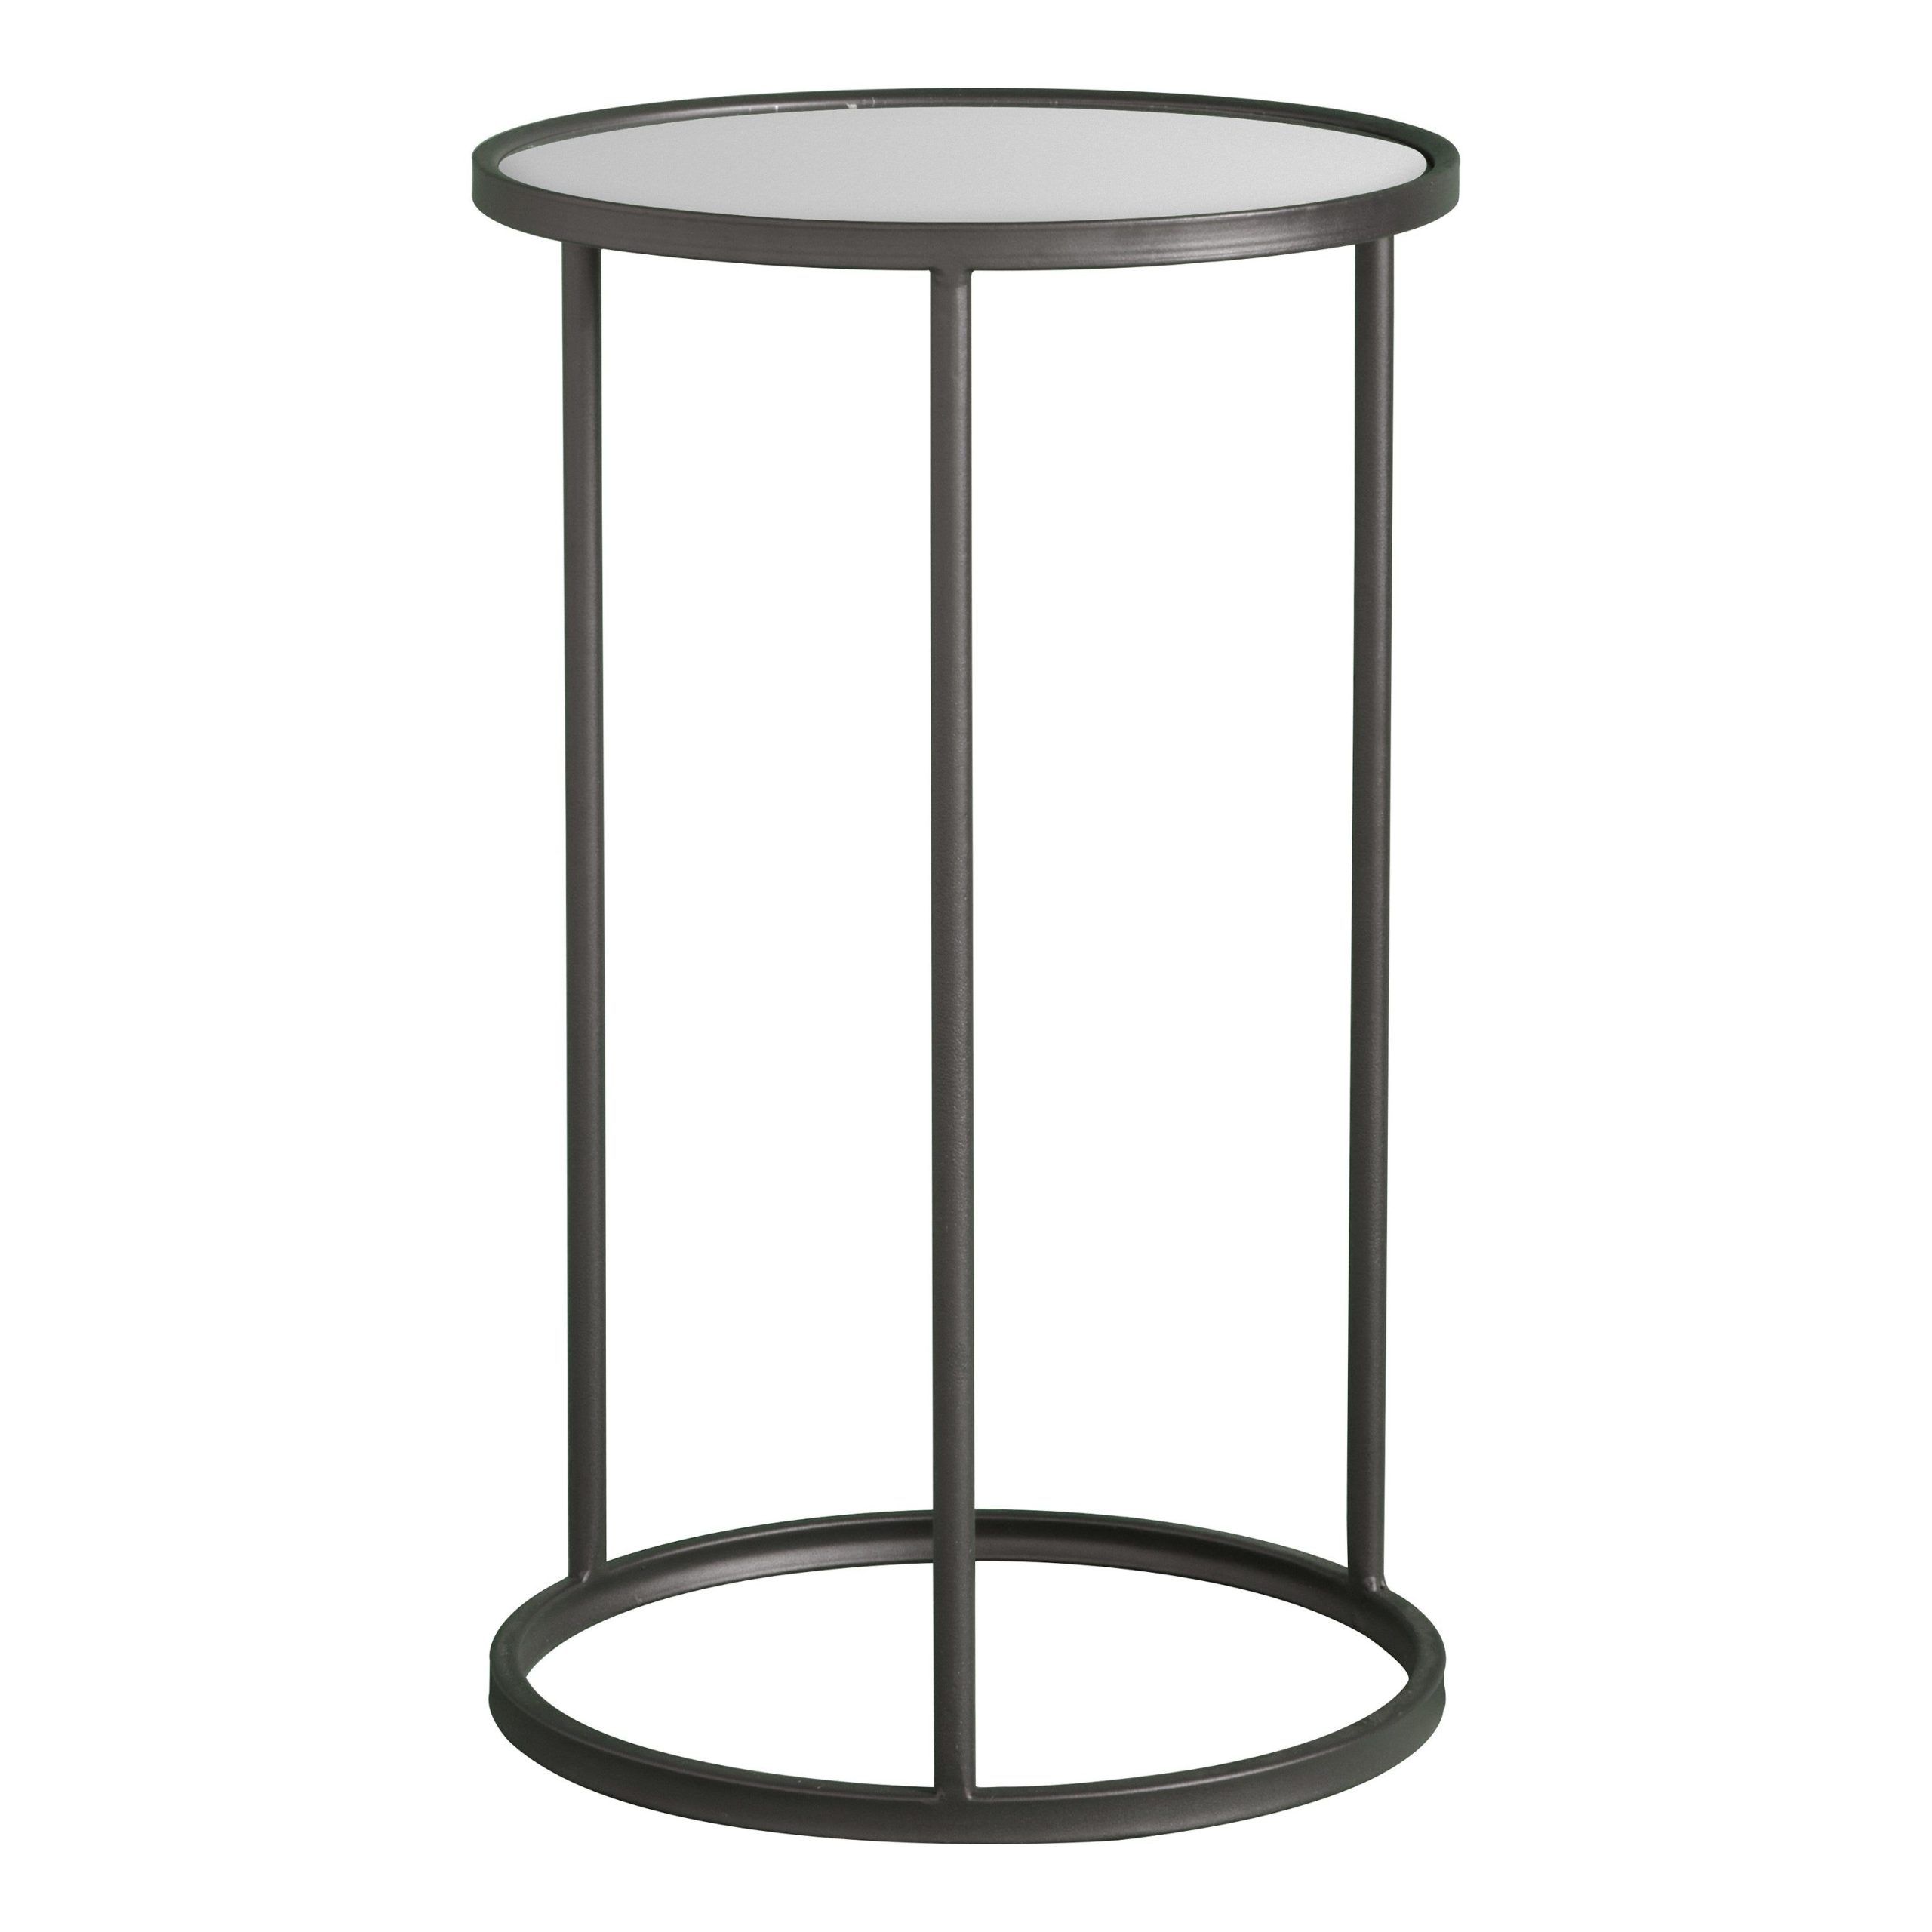 Huttone Side Table | Metal Side Table, Side Table, Mirror Side Table Pertaining To Metal Side Tables For Living Spaces (View 8 of 15)